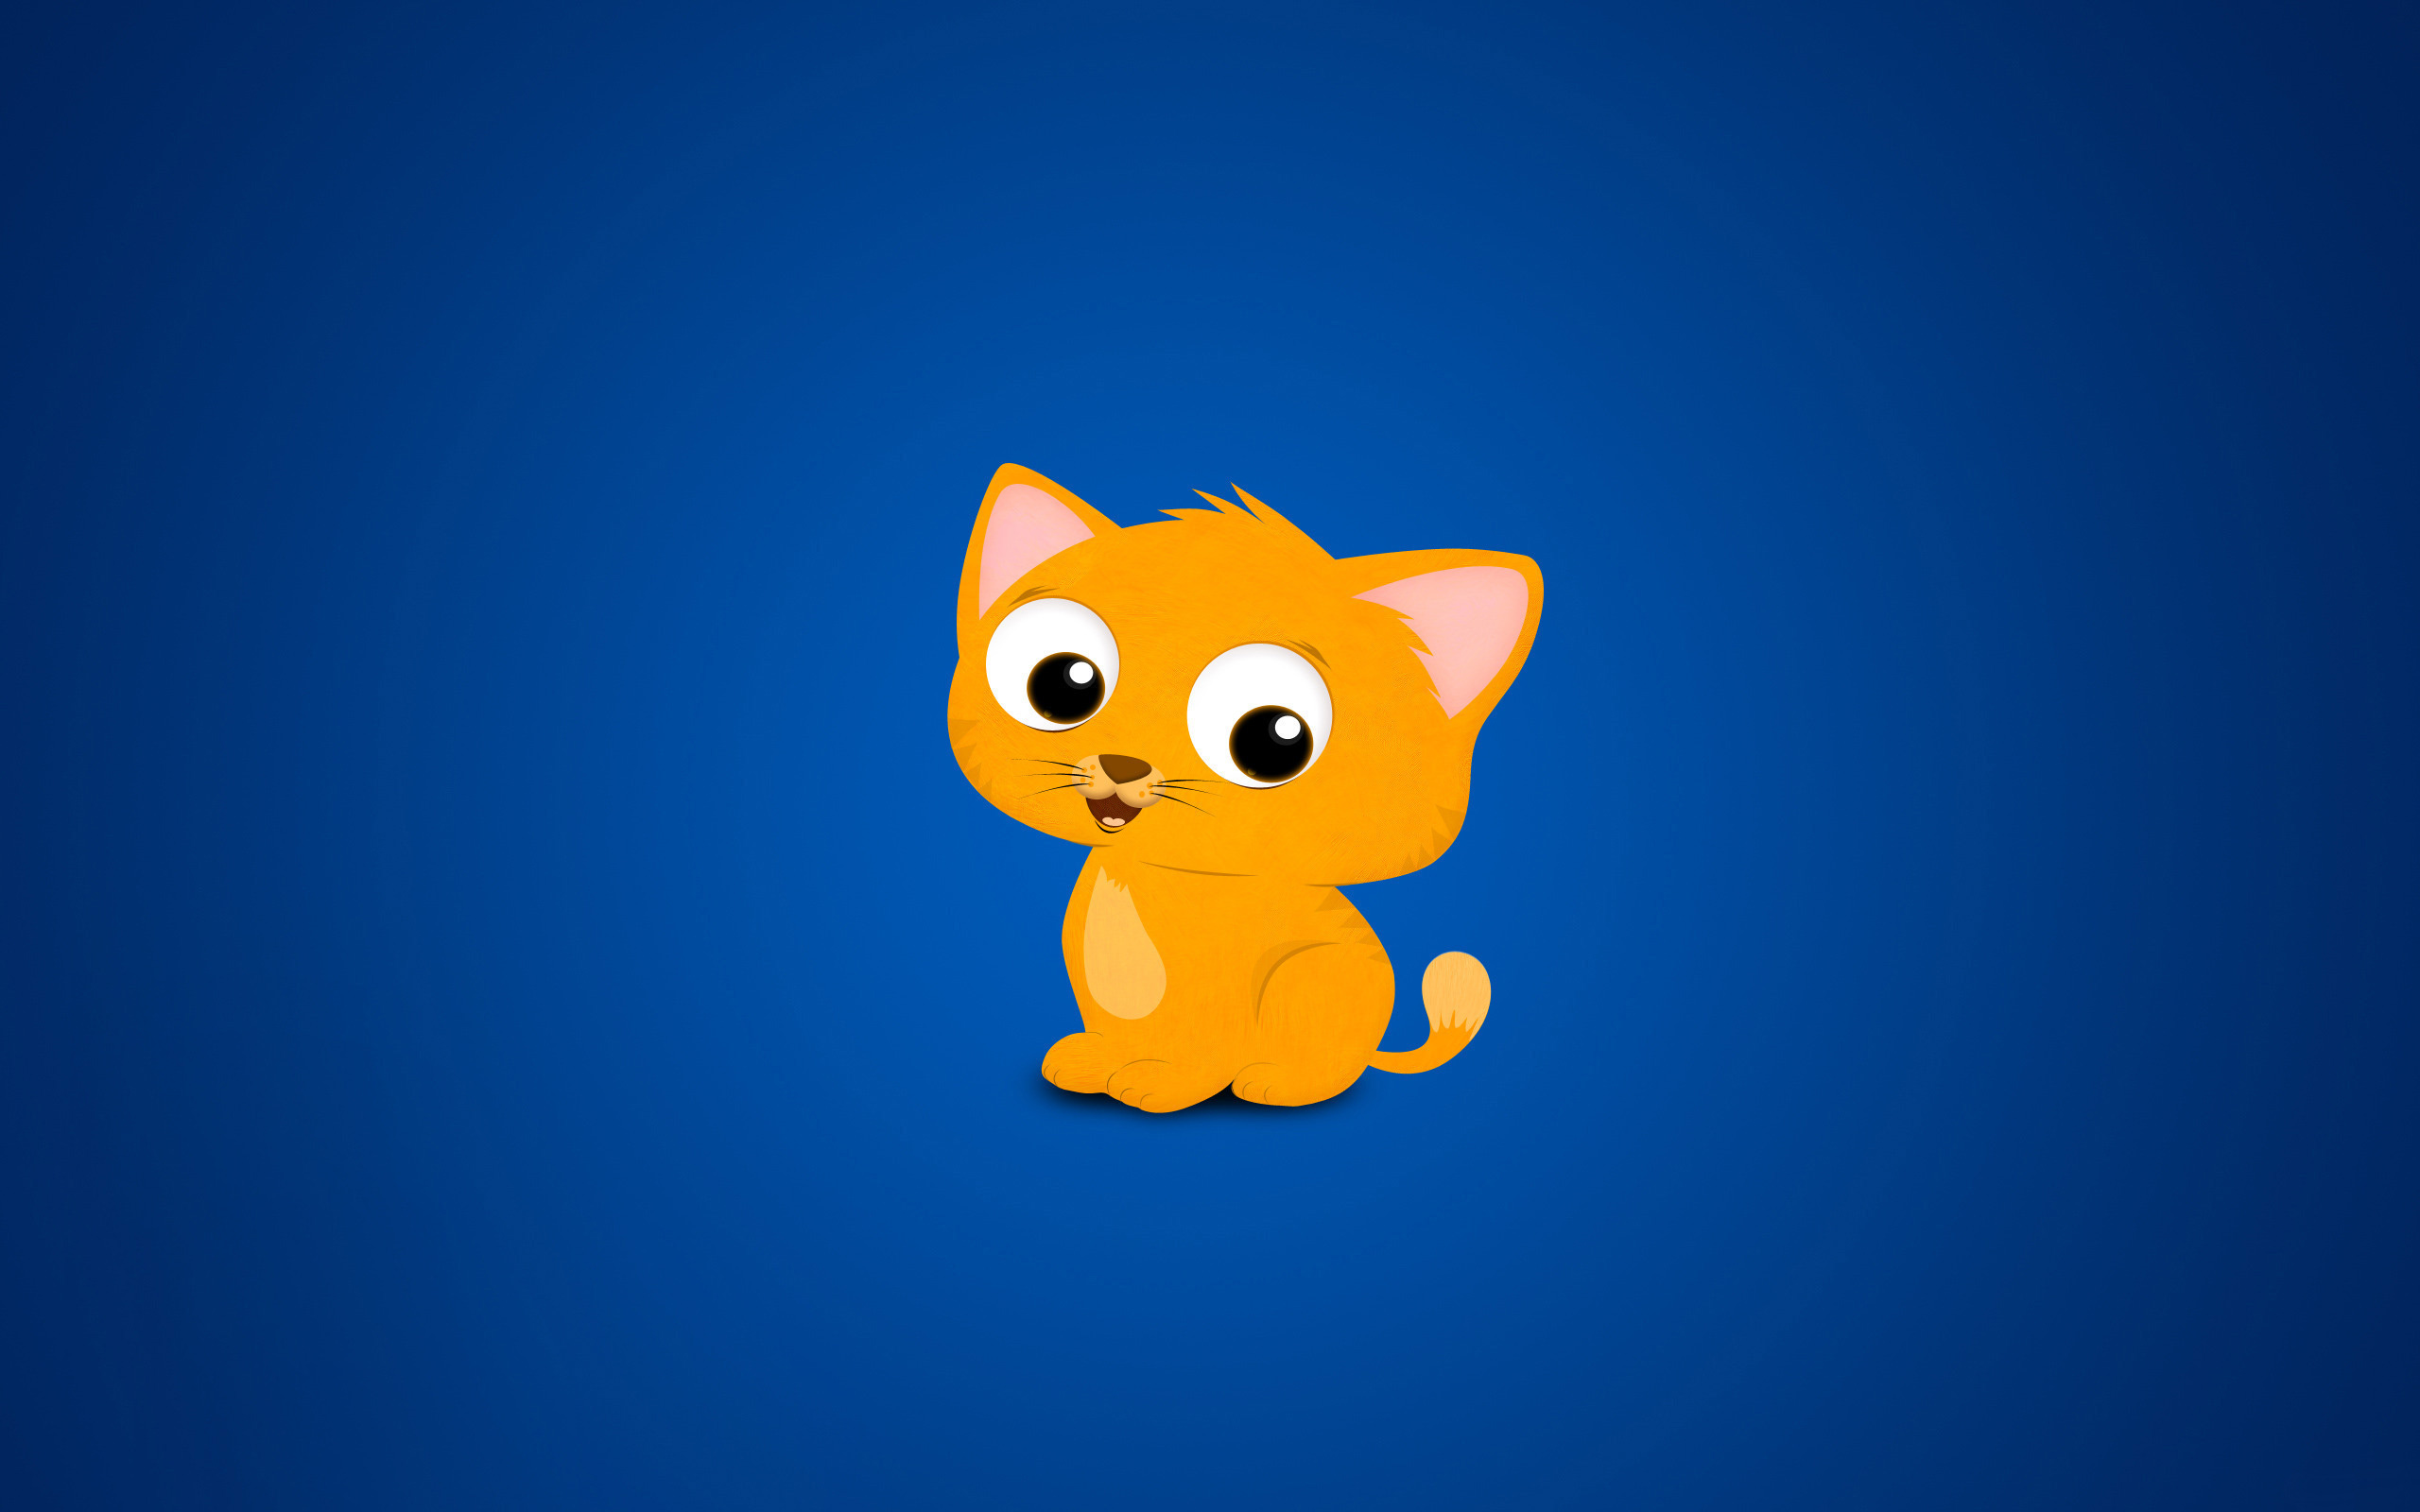 Free Cute Cartoon Images, Download Free Cute Cartoon Images png images